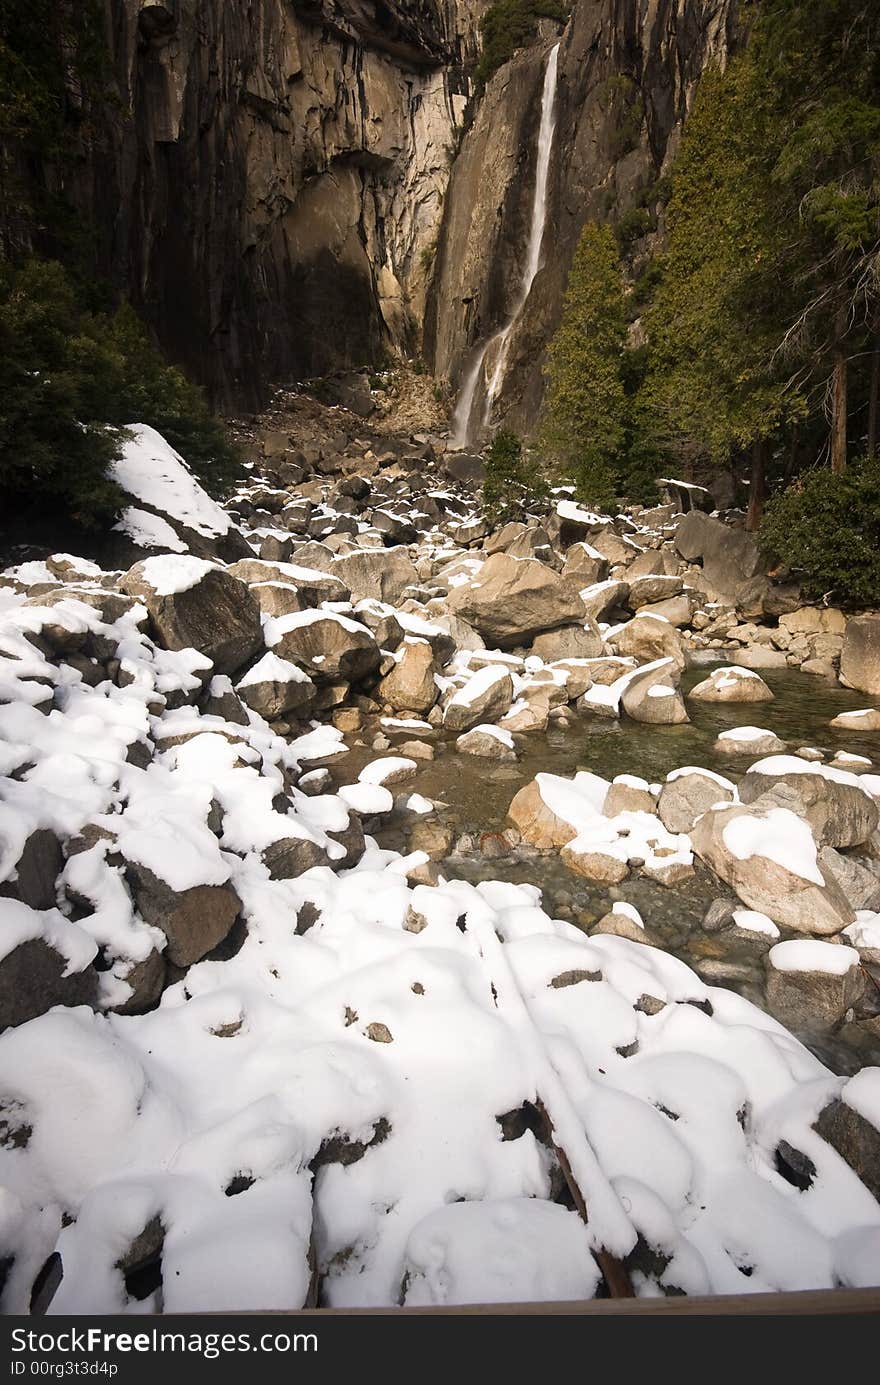 This is the lower yosemite falls with snow, in Yosemite National Park.